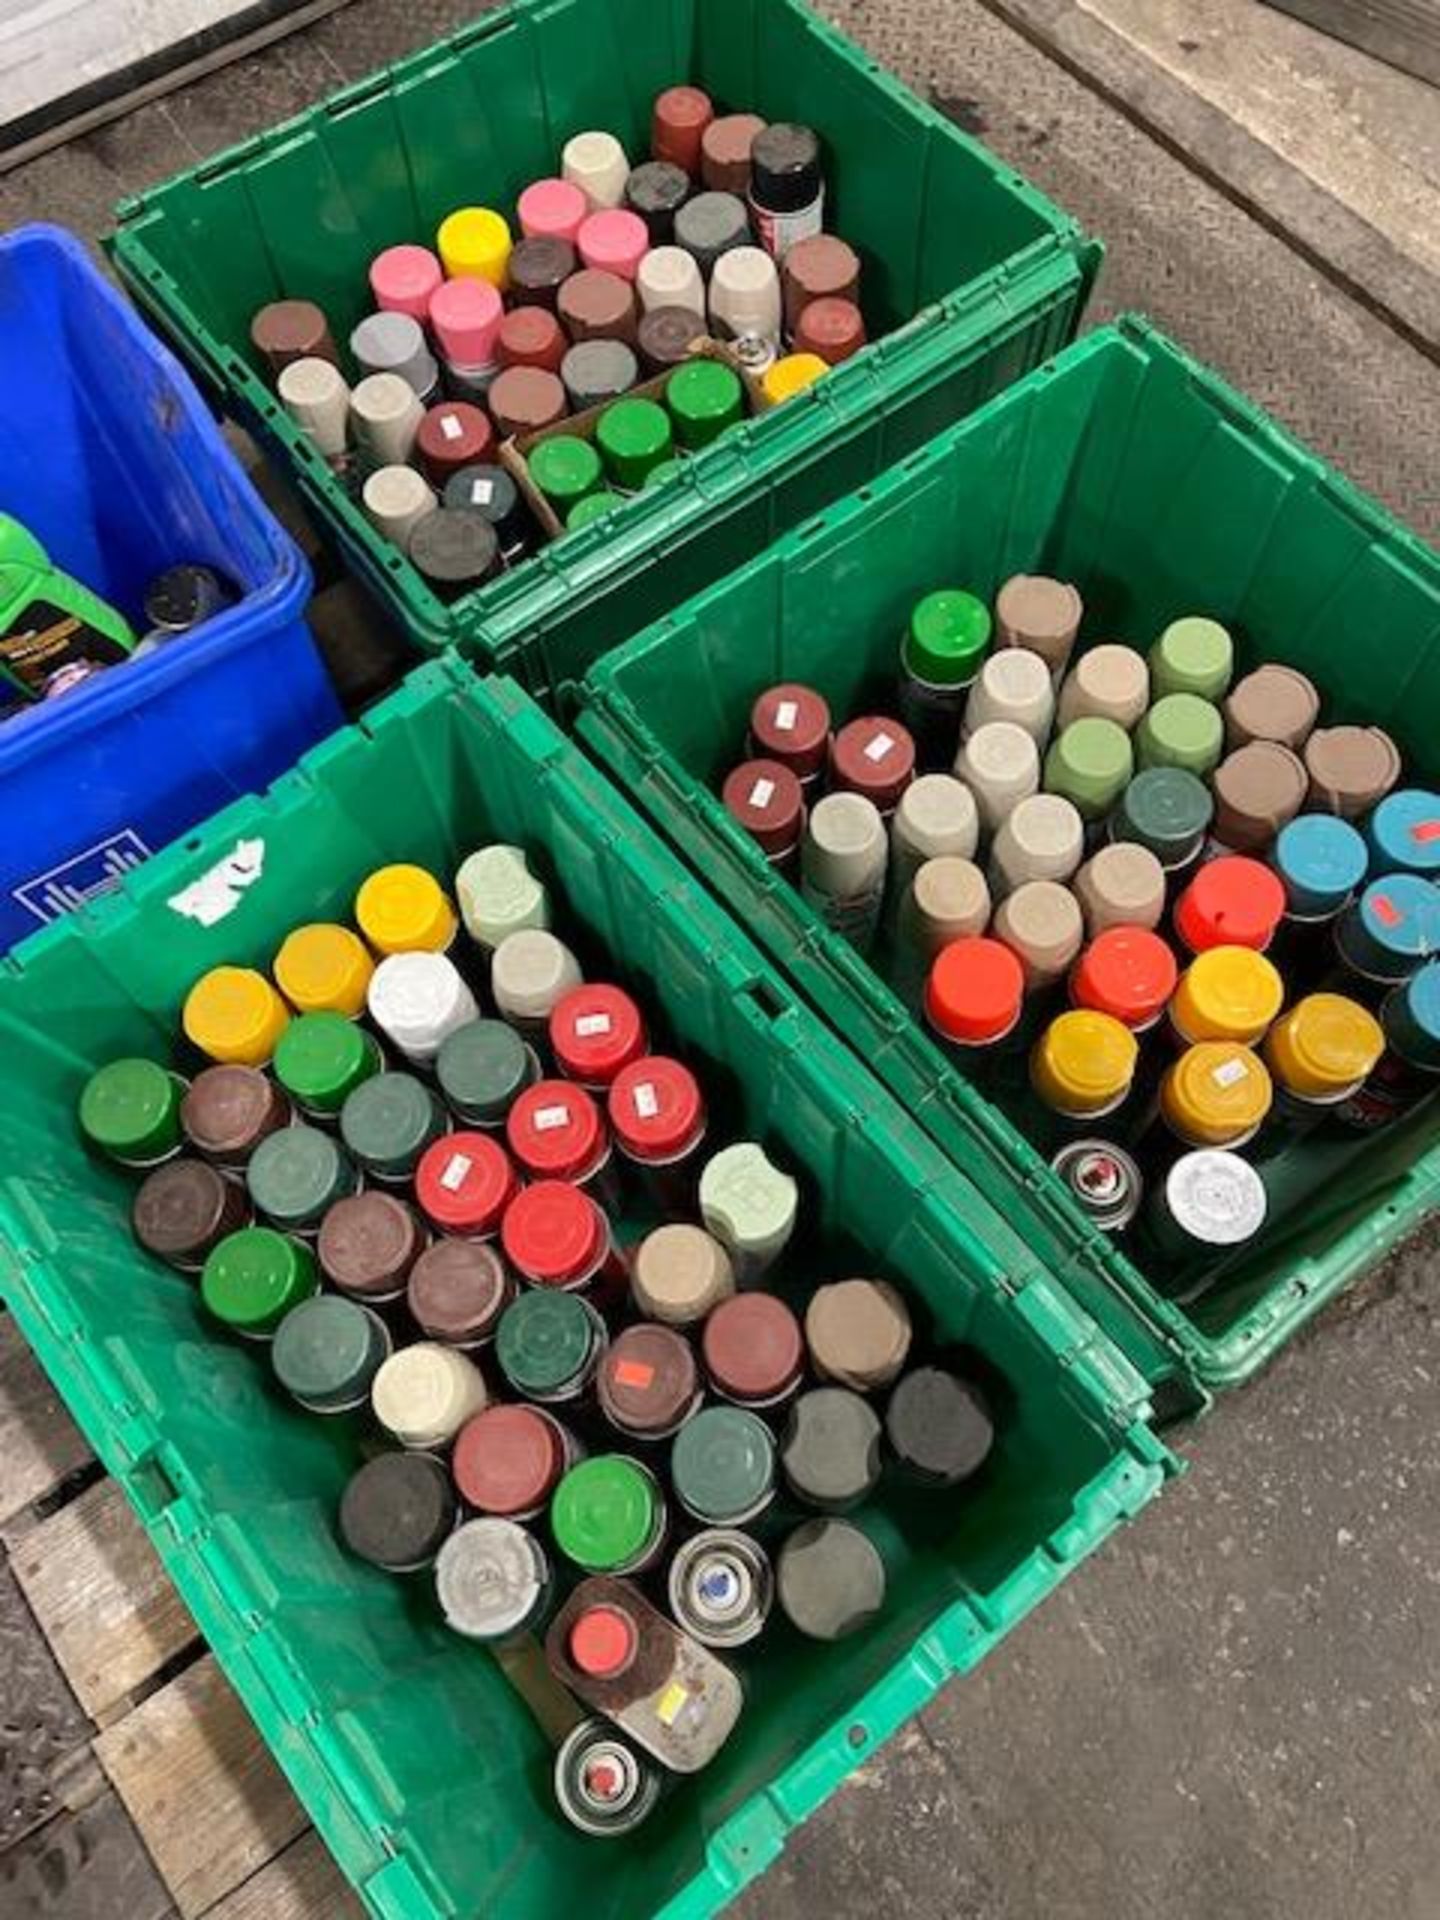 Lot of 100+ Cans of Spray Paint